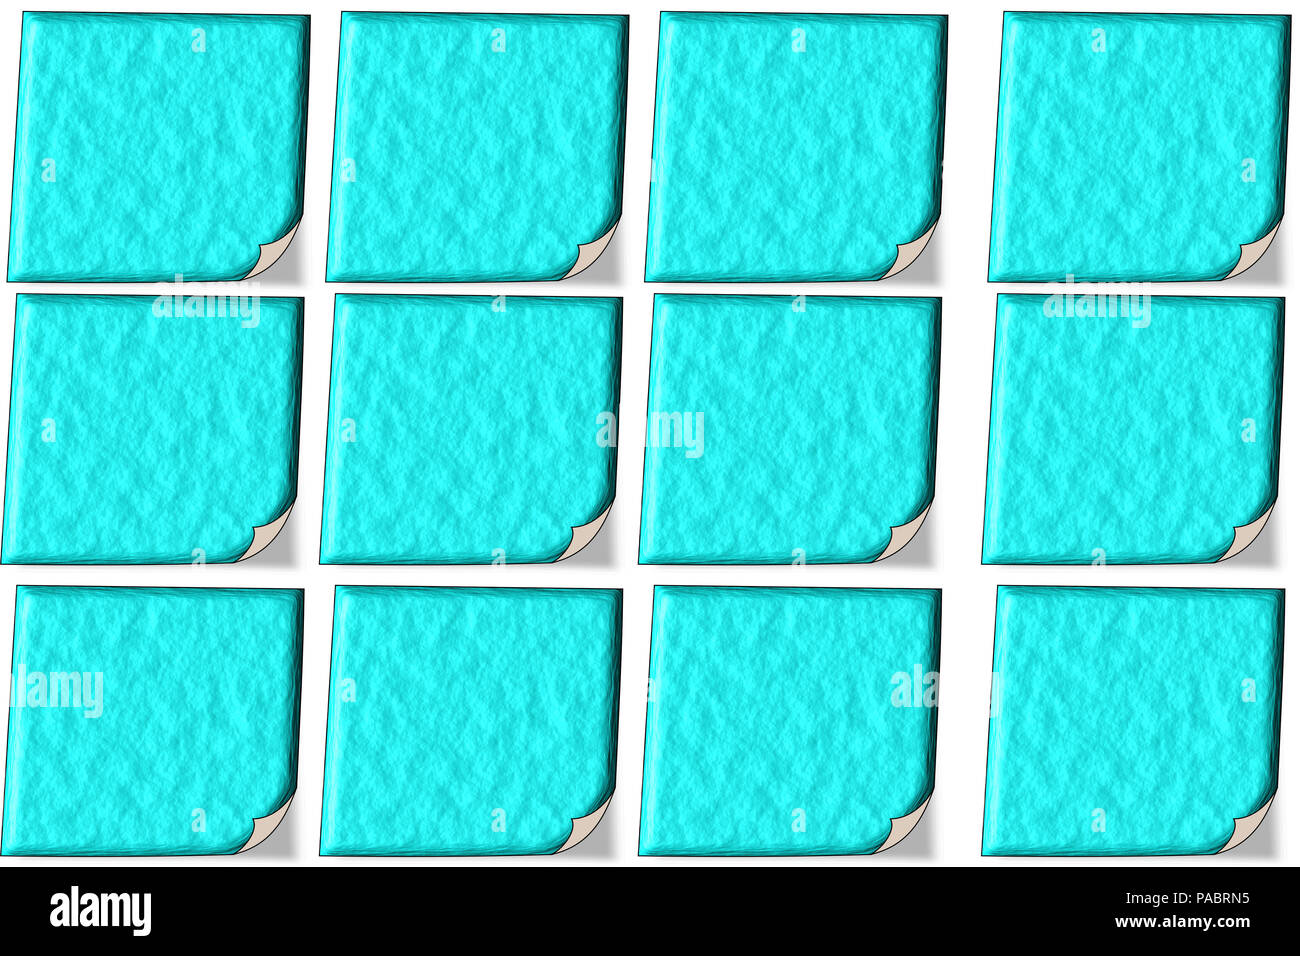 Empty blue sticky notes. Office accessories for listing notes against white background. Stock Photo